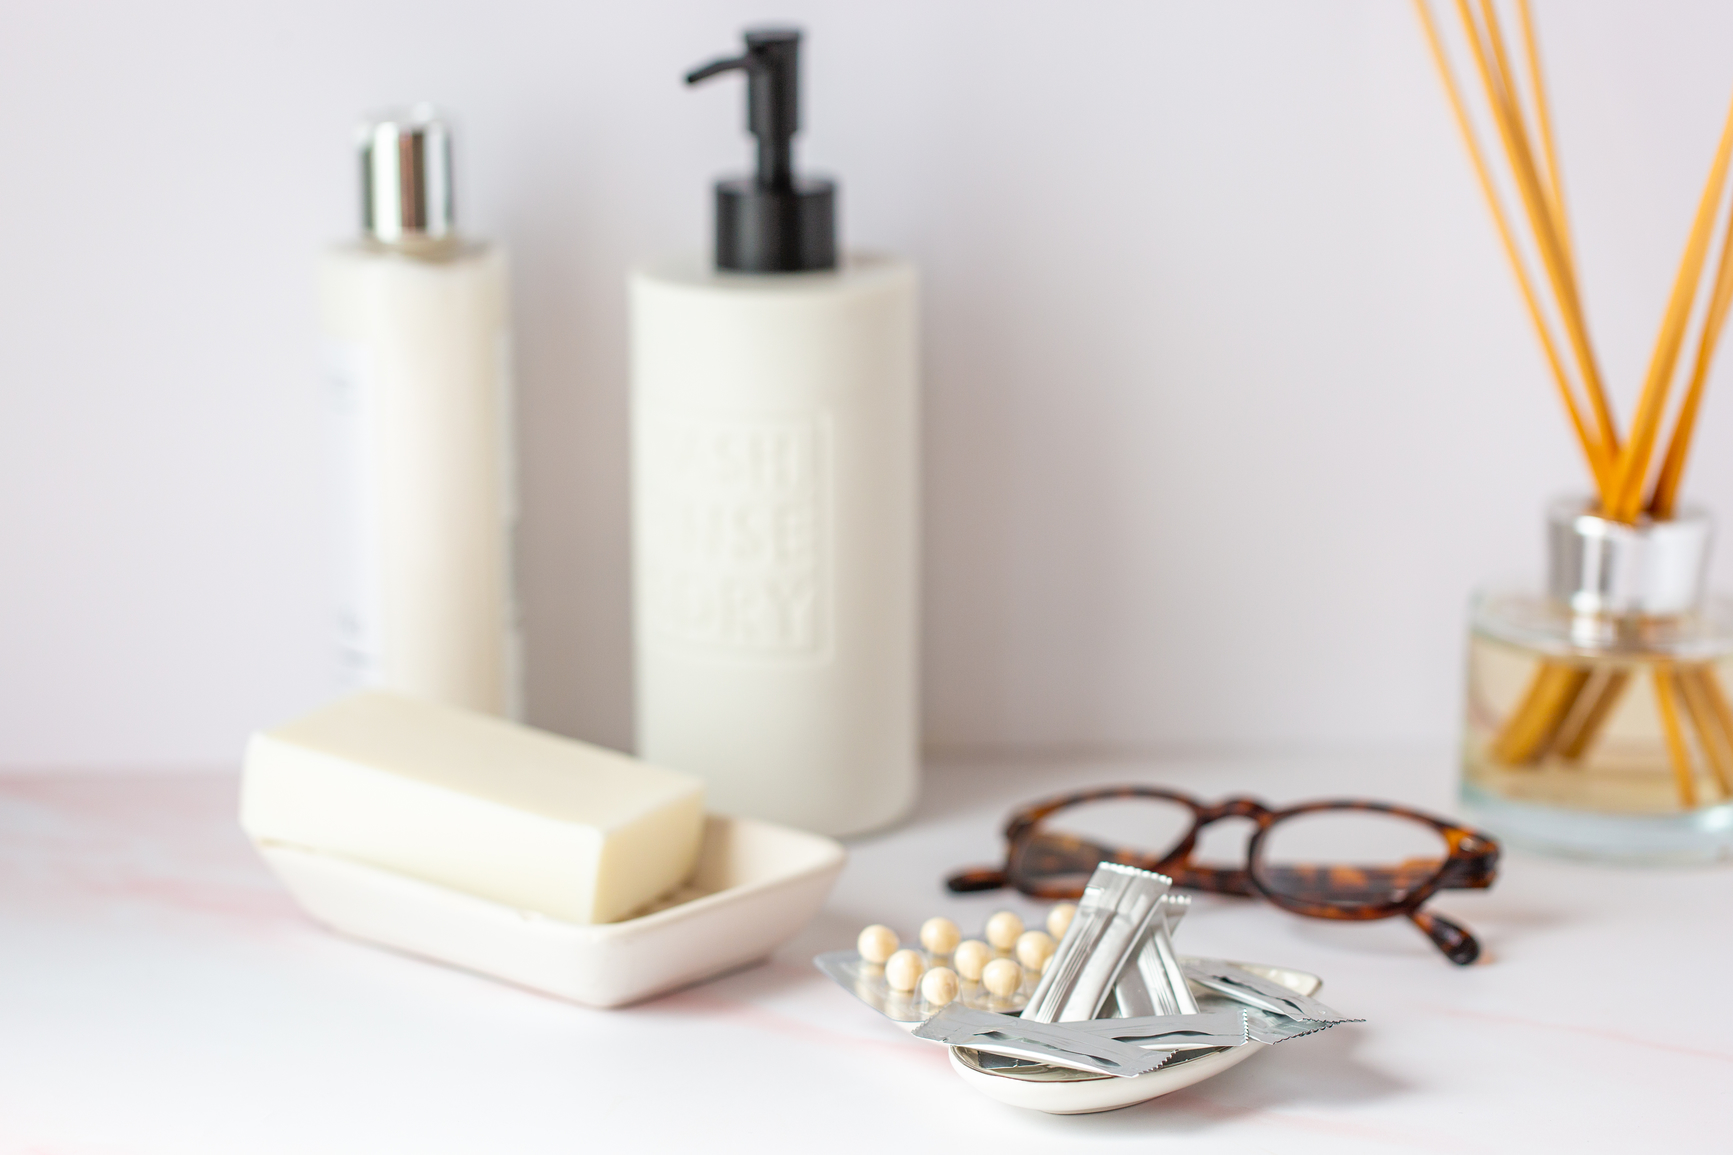 AW175 Why Estrogen? (top) (photo showing bathroom vanity with still life of beauty products, eyeglasses and a tray of estrogen and progesterone products)